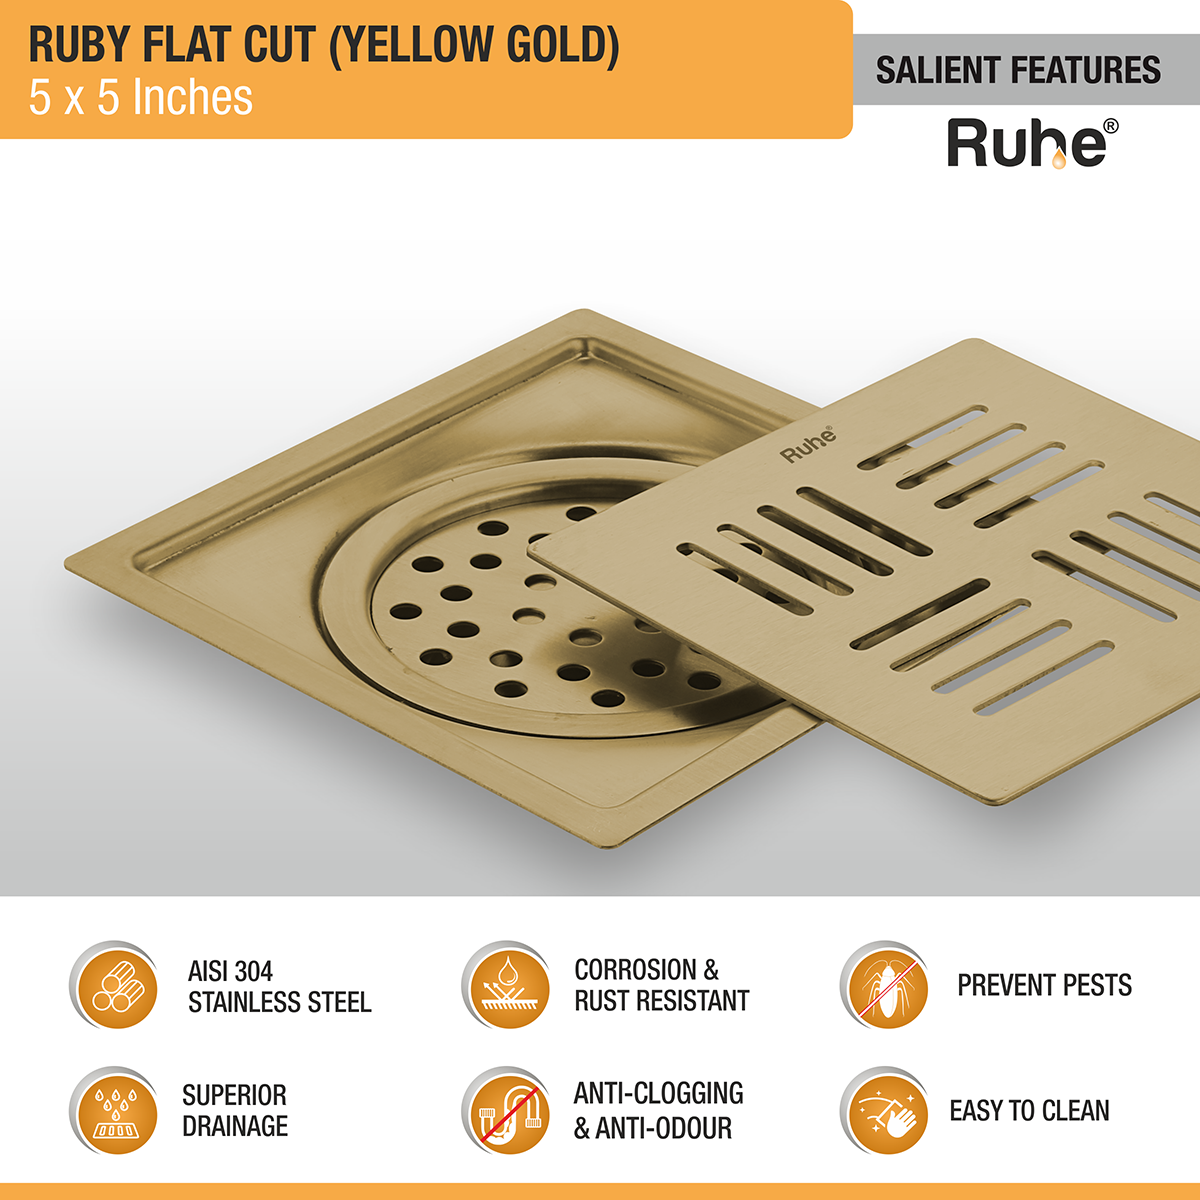 Ruby Square Flat Cut Floor Drain in Yellow Gold PVD Coating (5 x 5 Inches) features